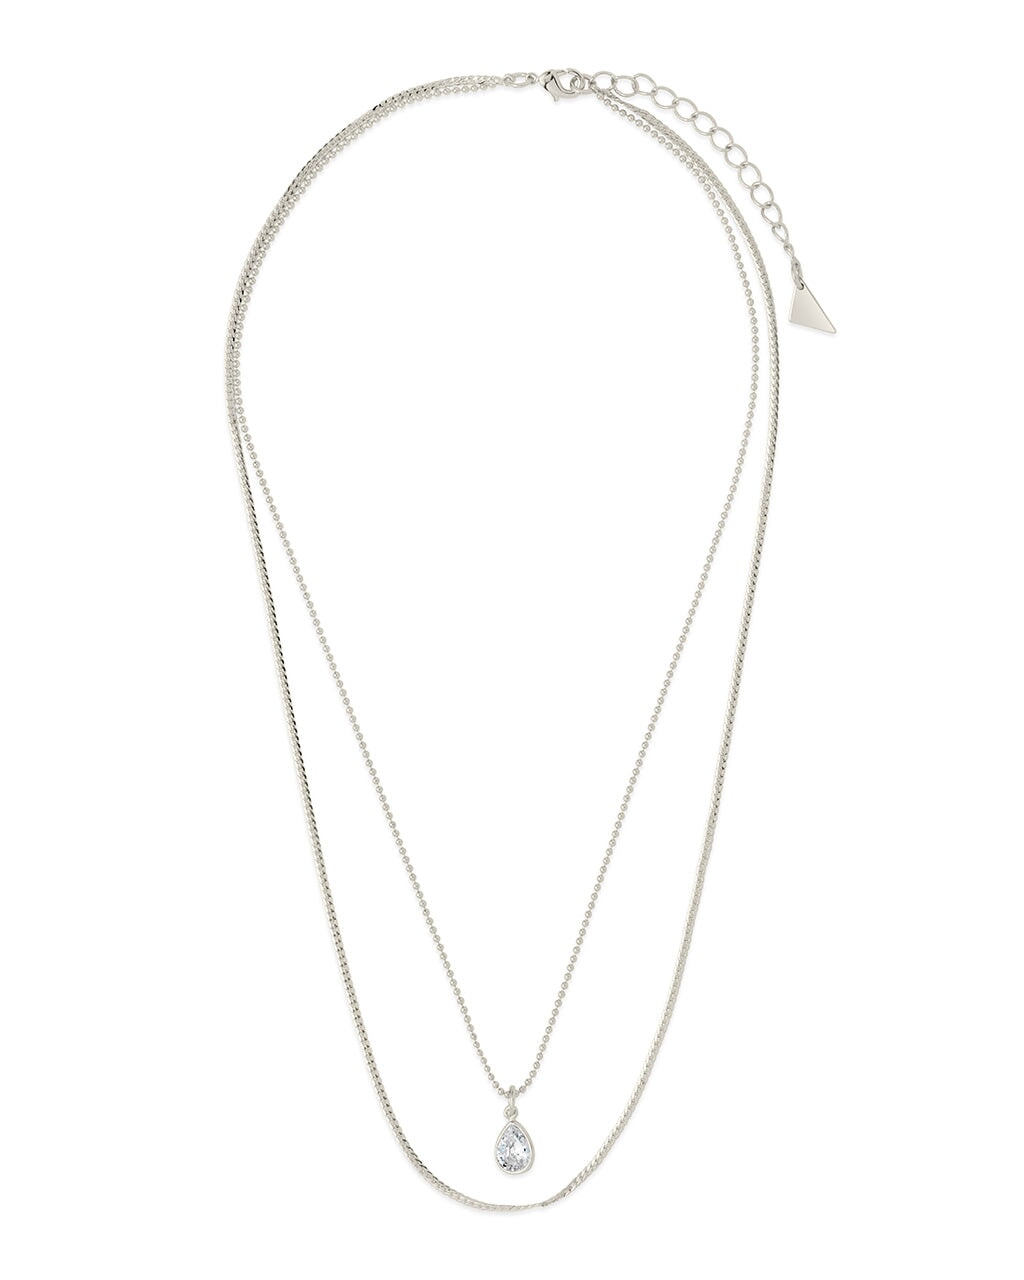 Phoebe CZ Layered Necklace Necklace Sterling Forever 